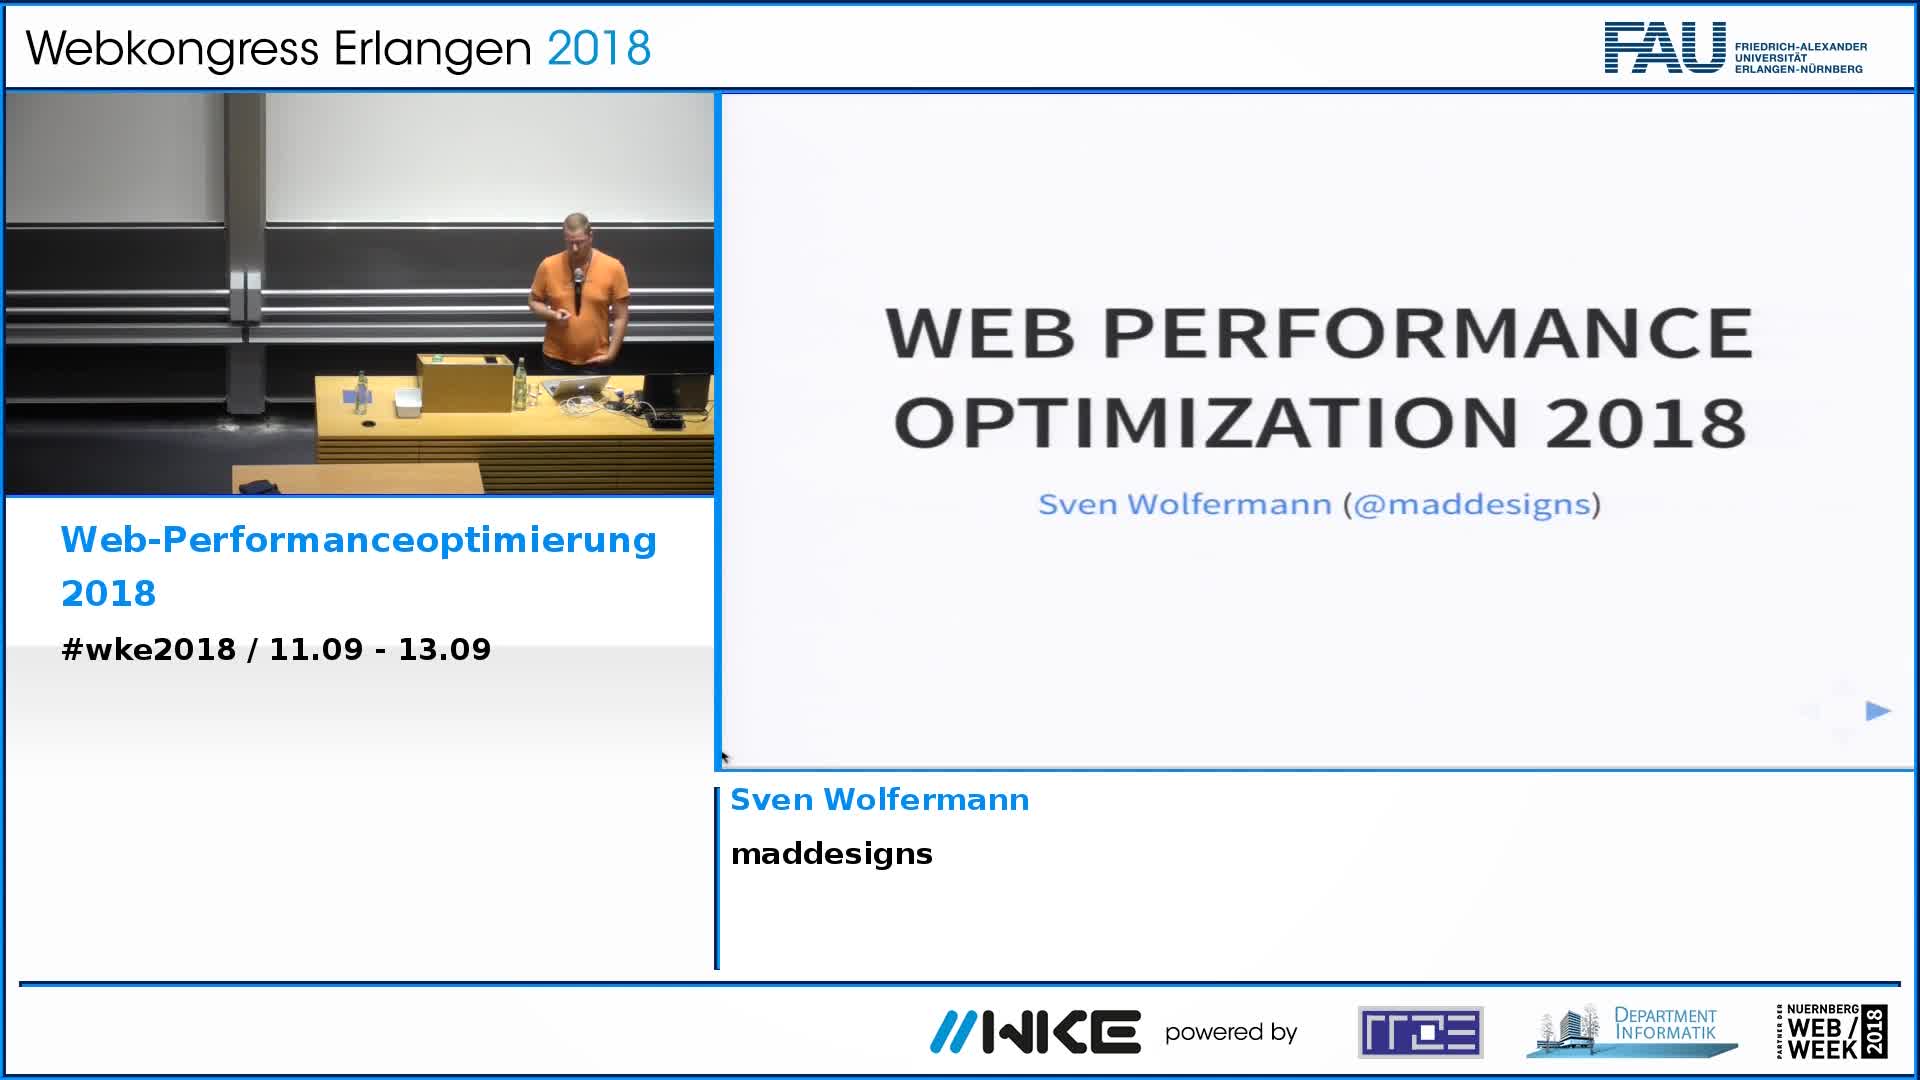 Web-Performanceoptimierung 2018 preview image